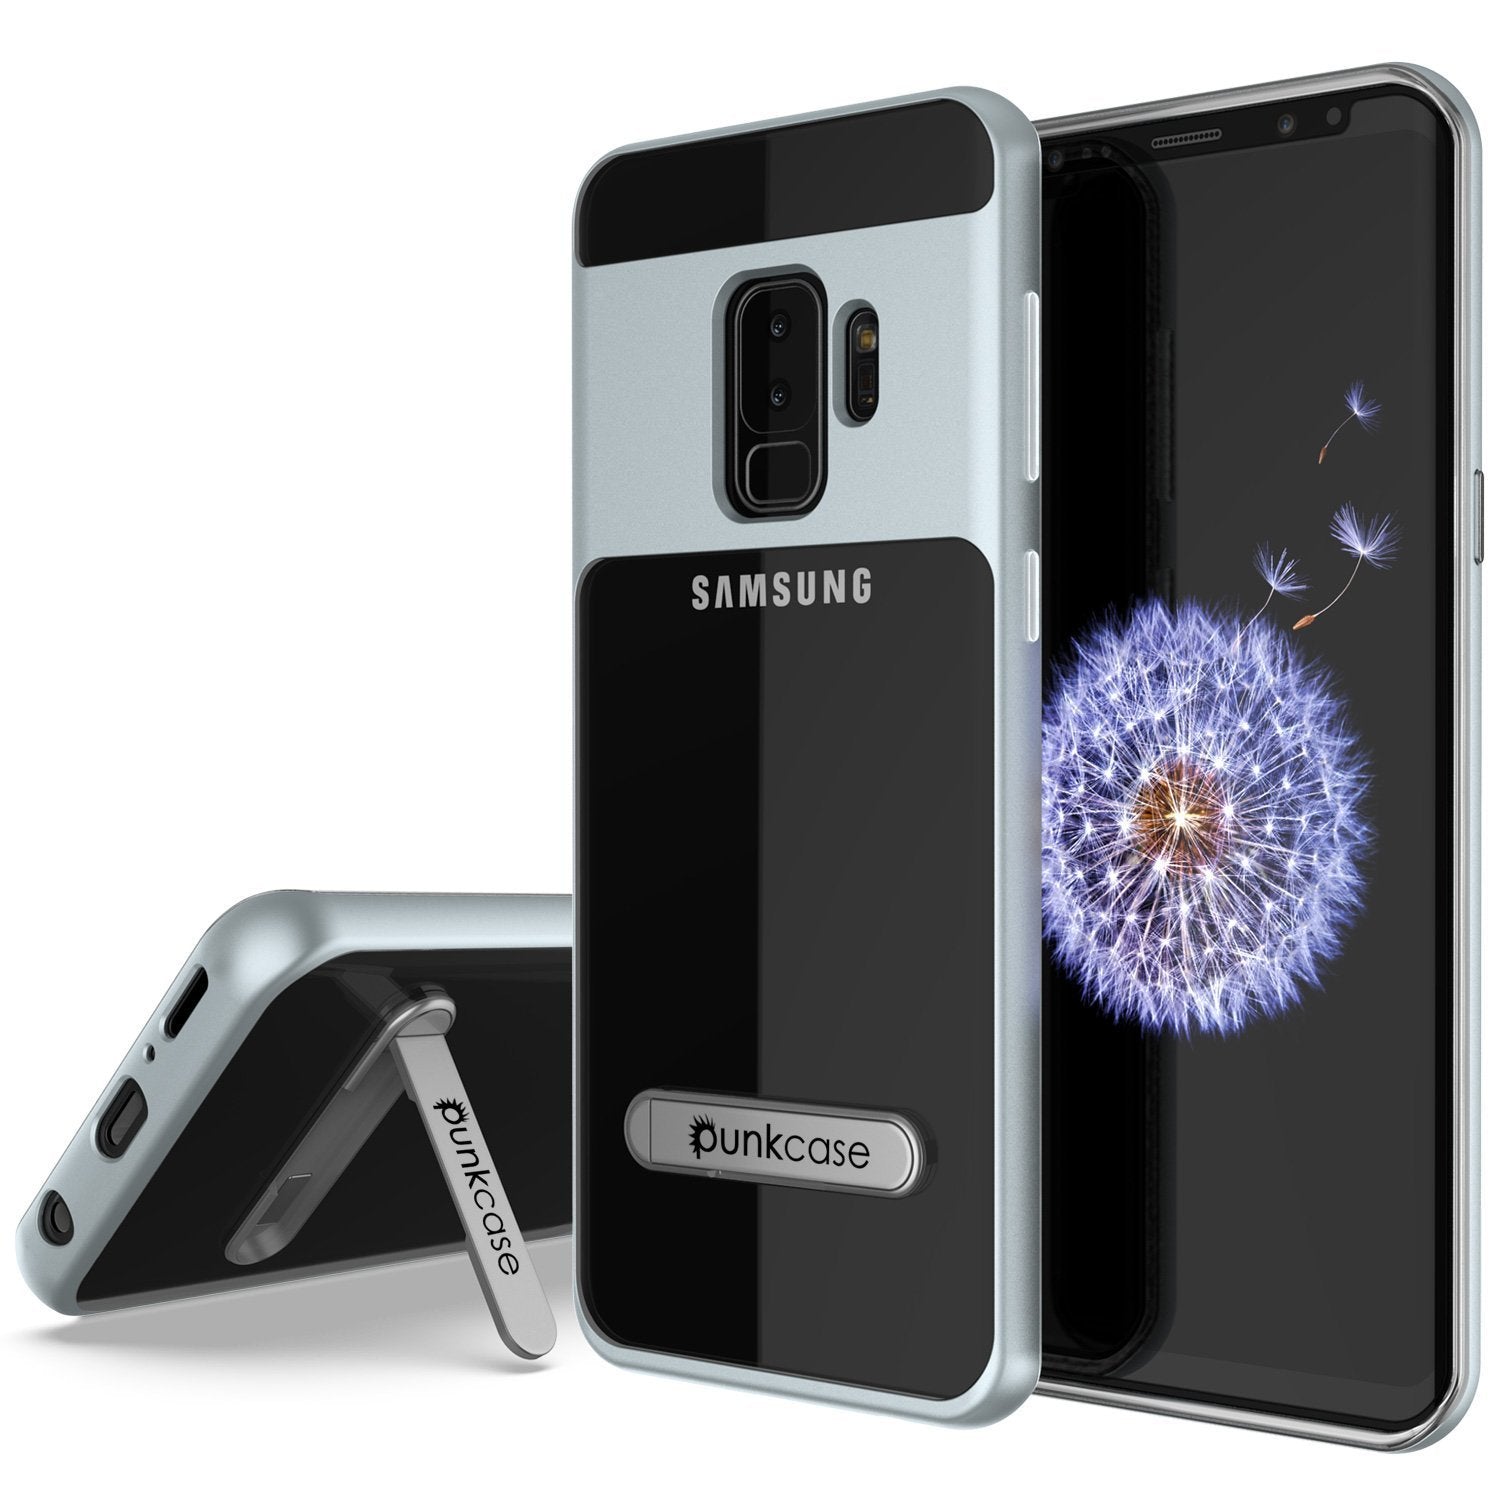 Galaxy S9+ Plus Case, PUNKcase [LUCID 3.0 Series] [Slim Fit] [Clear Back] Armor Cover w/ Integrated Kickstand, Anti-Shock System & PUNKSHIELD Screen Protector for Samsung Galaxy S9+ Plus [Silver] - PunkCase NZ